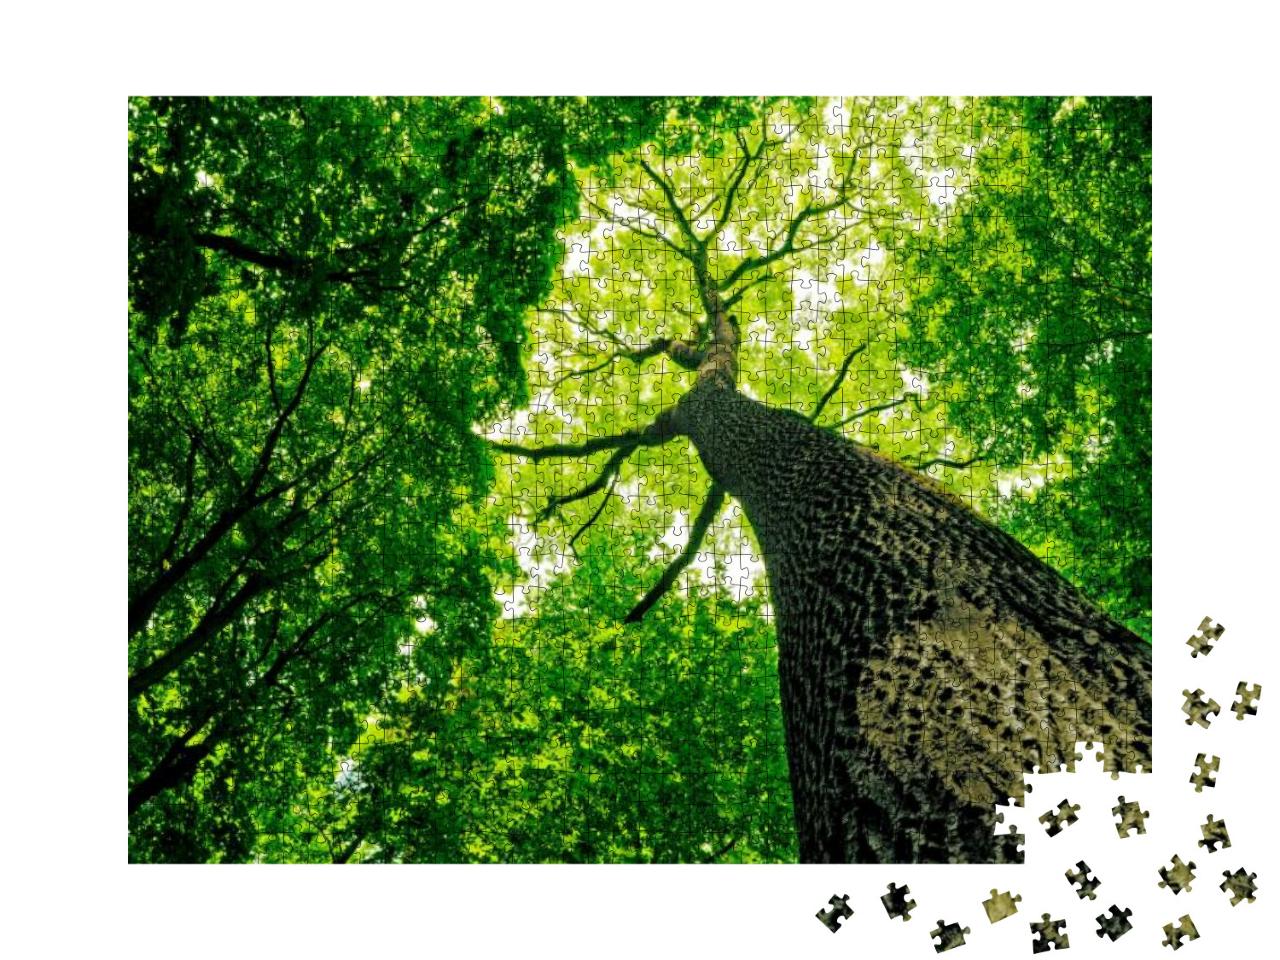 Forest Trees. Nature Green Wood Sunlight Backgrounds... Jigsaw Puzzle with 1000 pieces